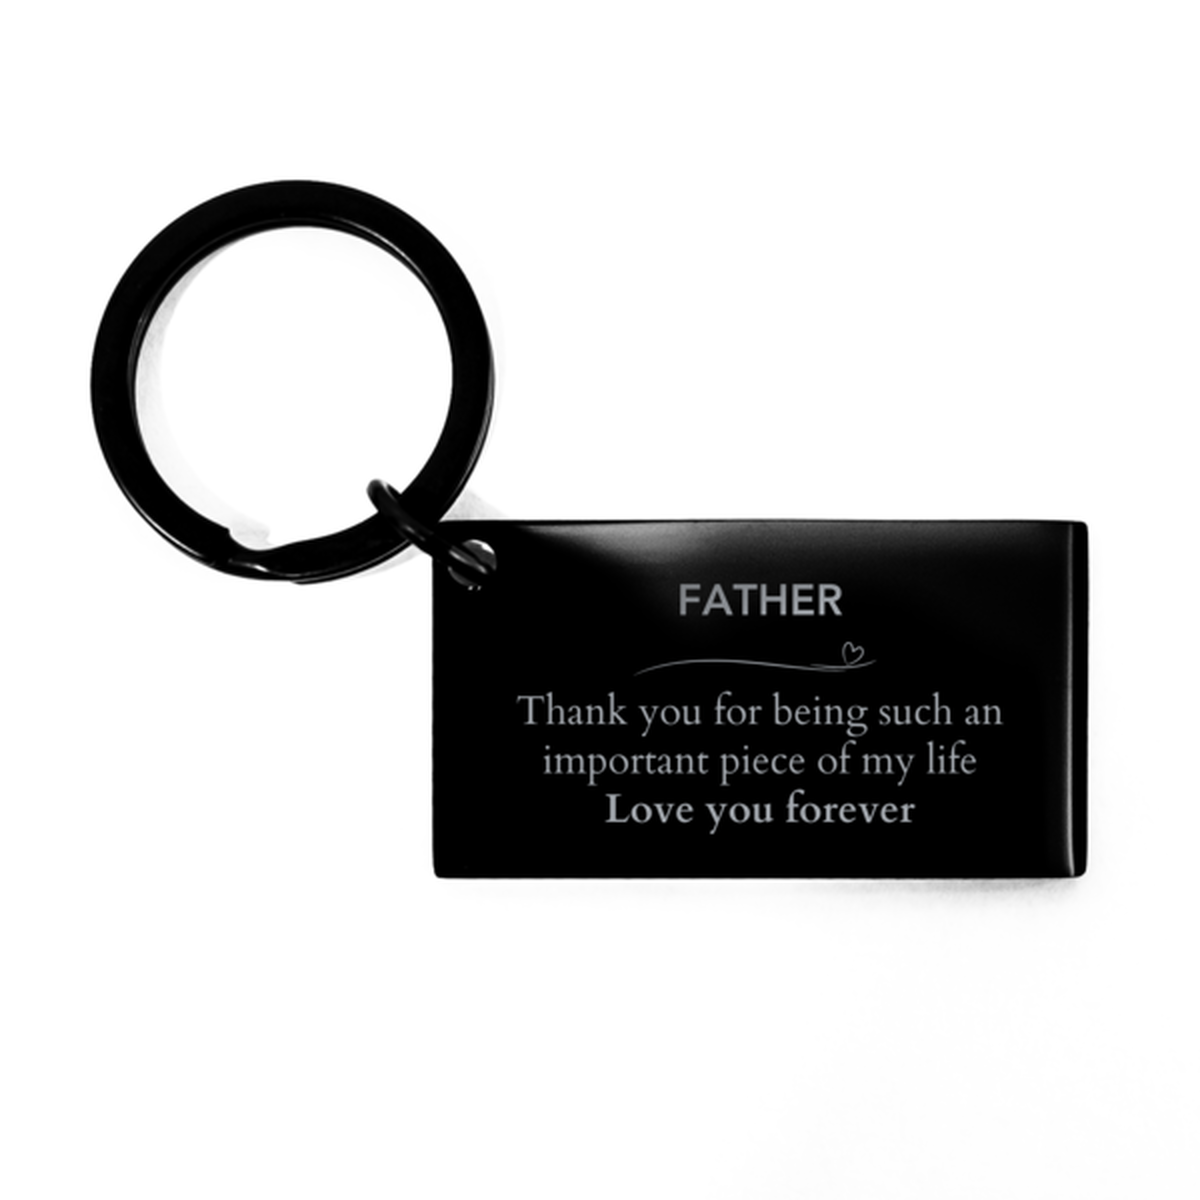 Appropriate Father Keychain Epic Birthday Gifts for Father Thank you for being such an important piece of my life Father Christmas Mothers Fathers Day